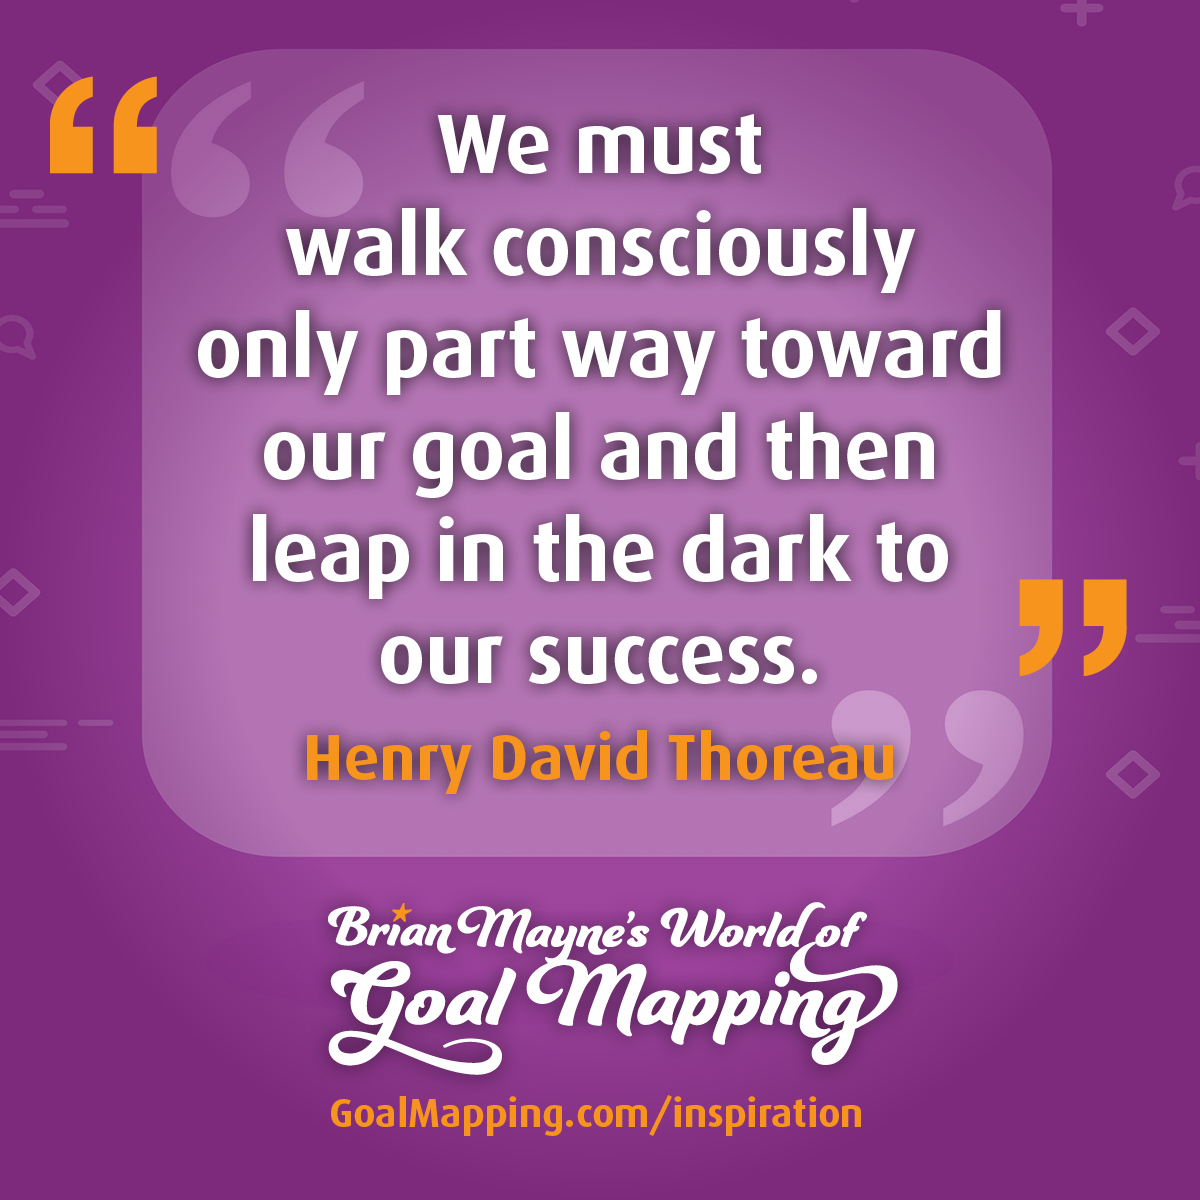 "We must walk consciously only part way toward our goal and then leap in the dark to our success." Henry David Thoreau